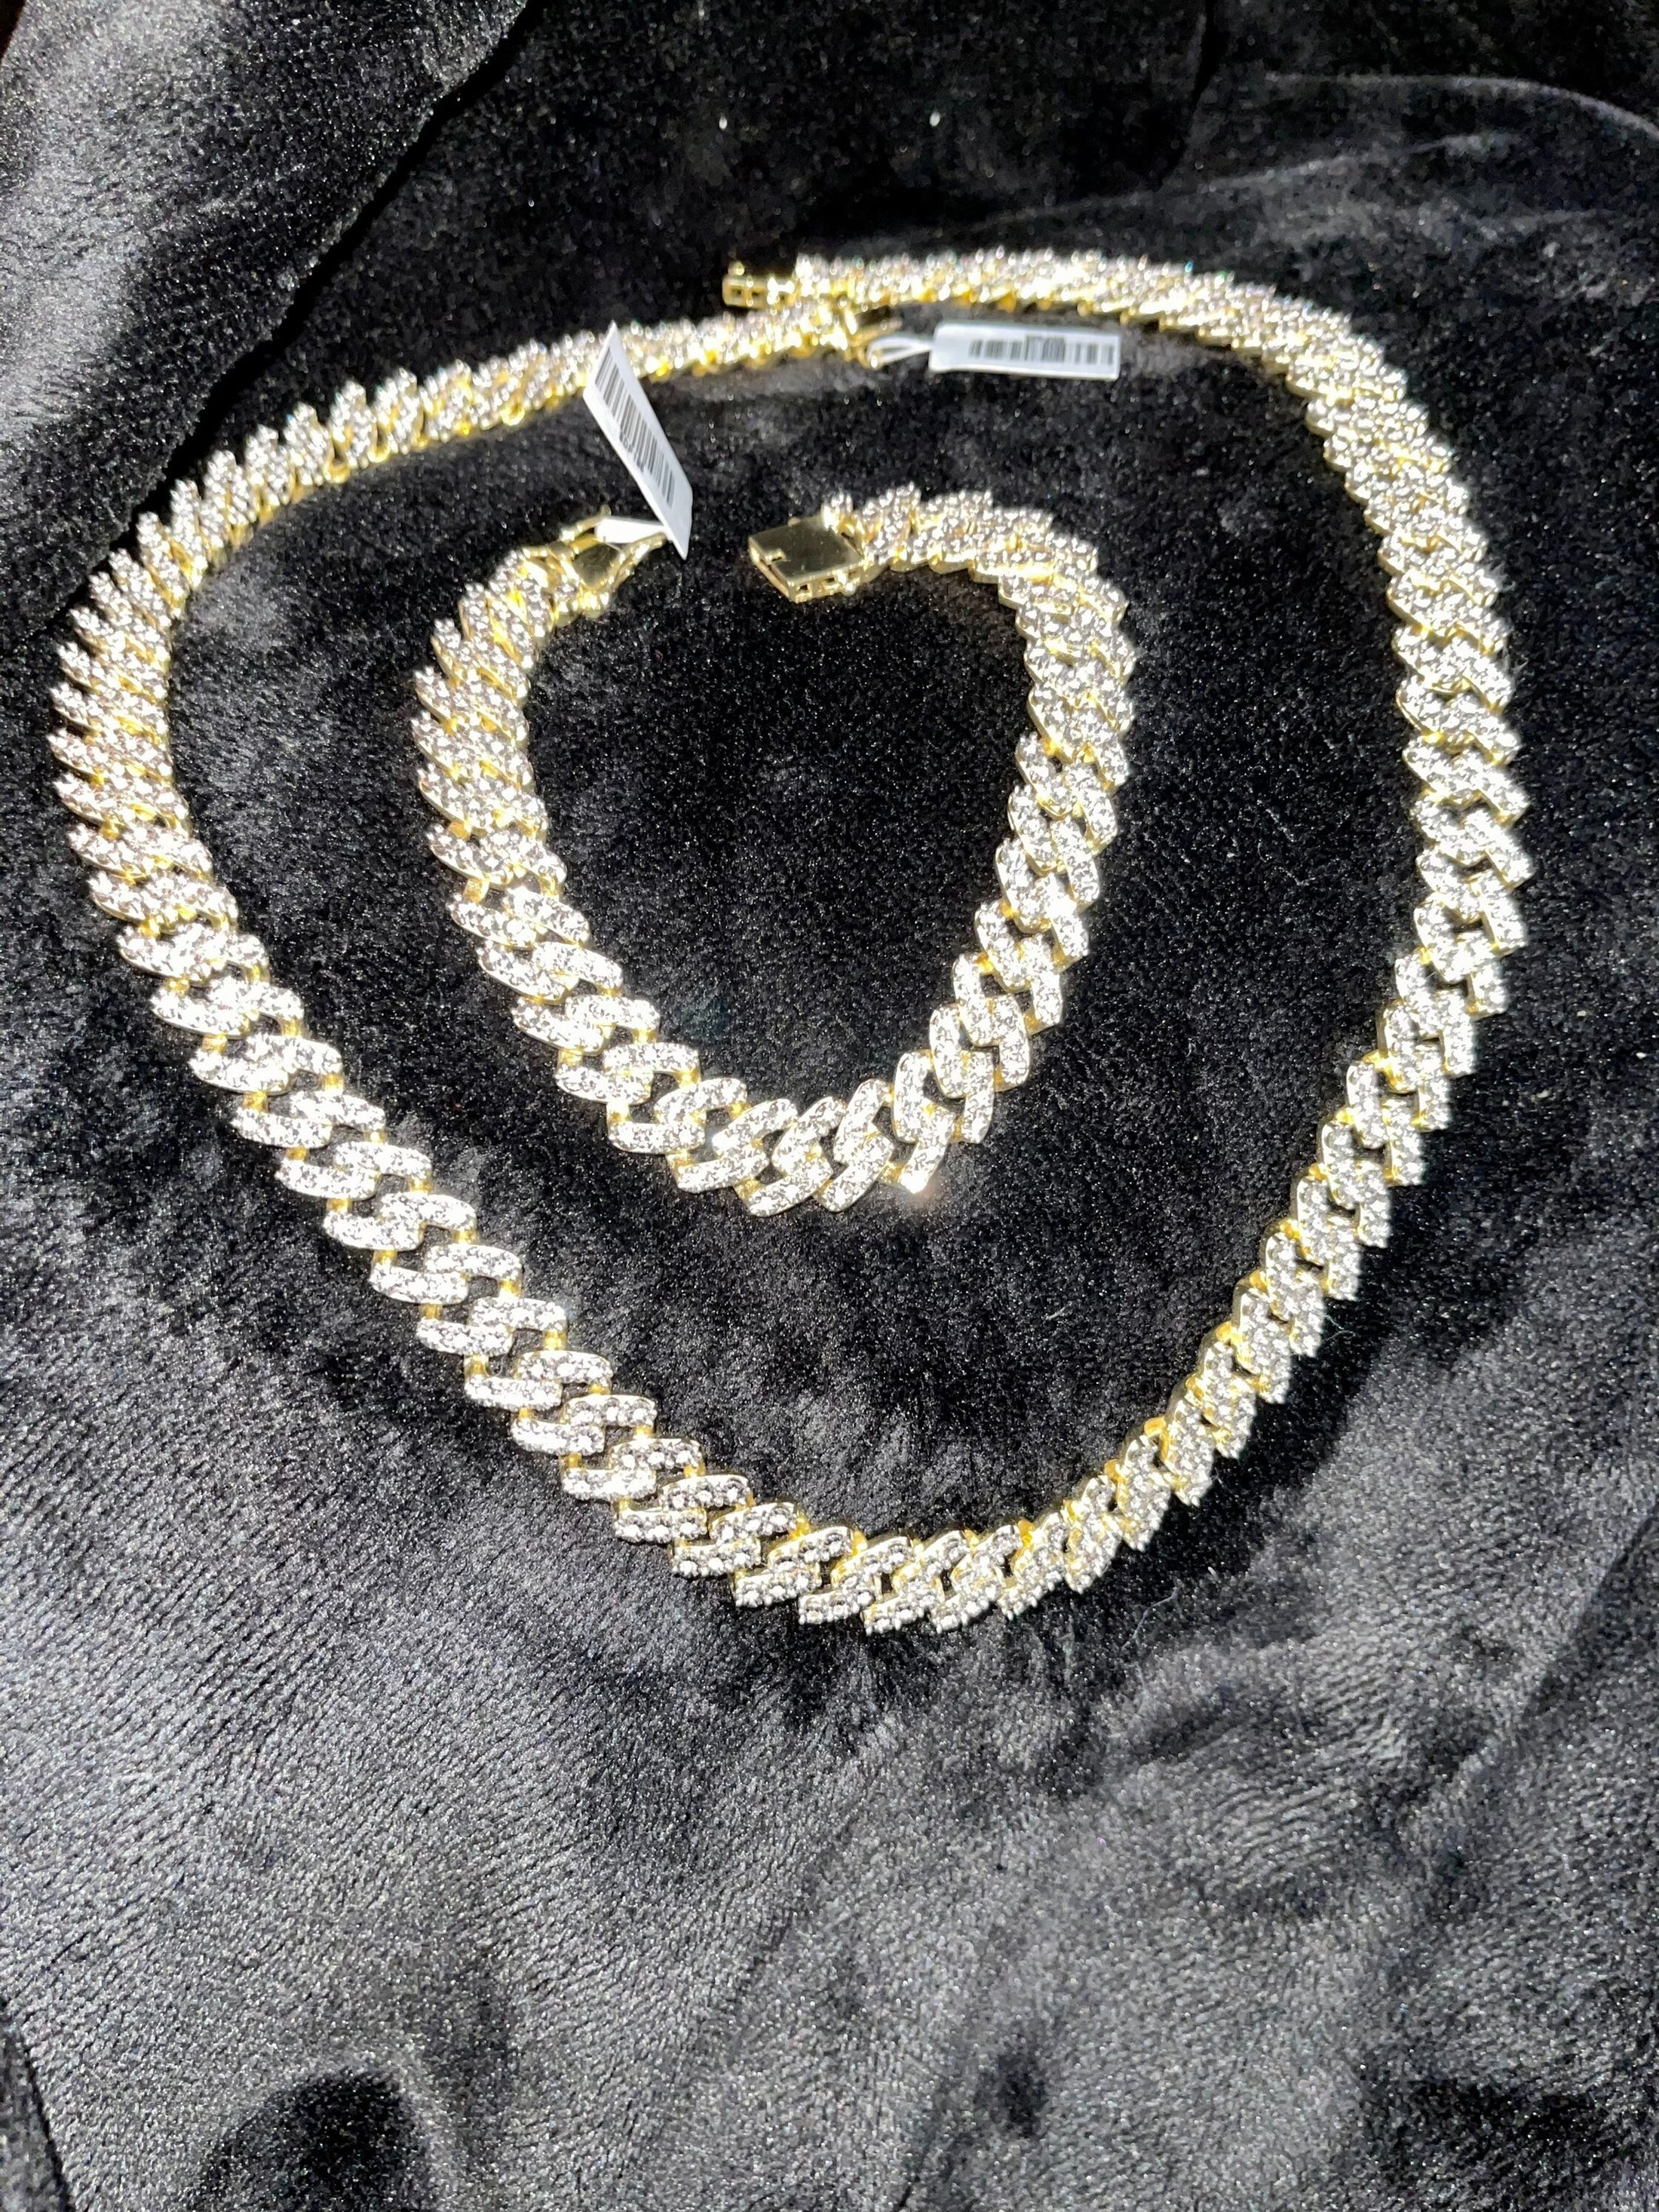 Real diamond Cuban link solid chain not cz not moissanite matching bracelet custom made 3ct natural diamond gift packaging and certified